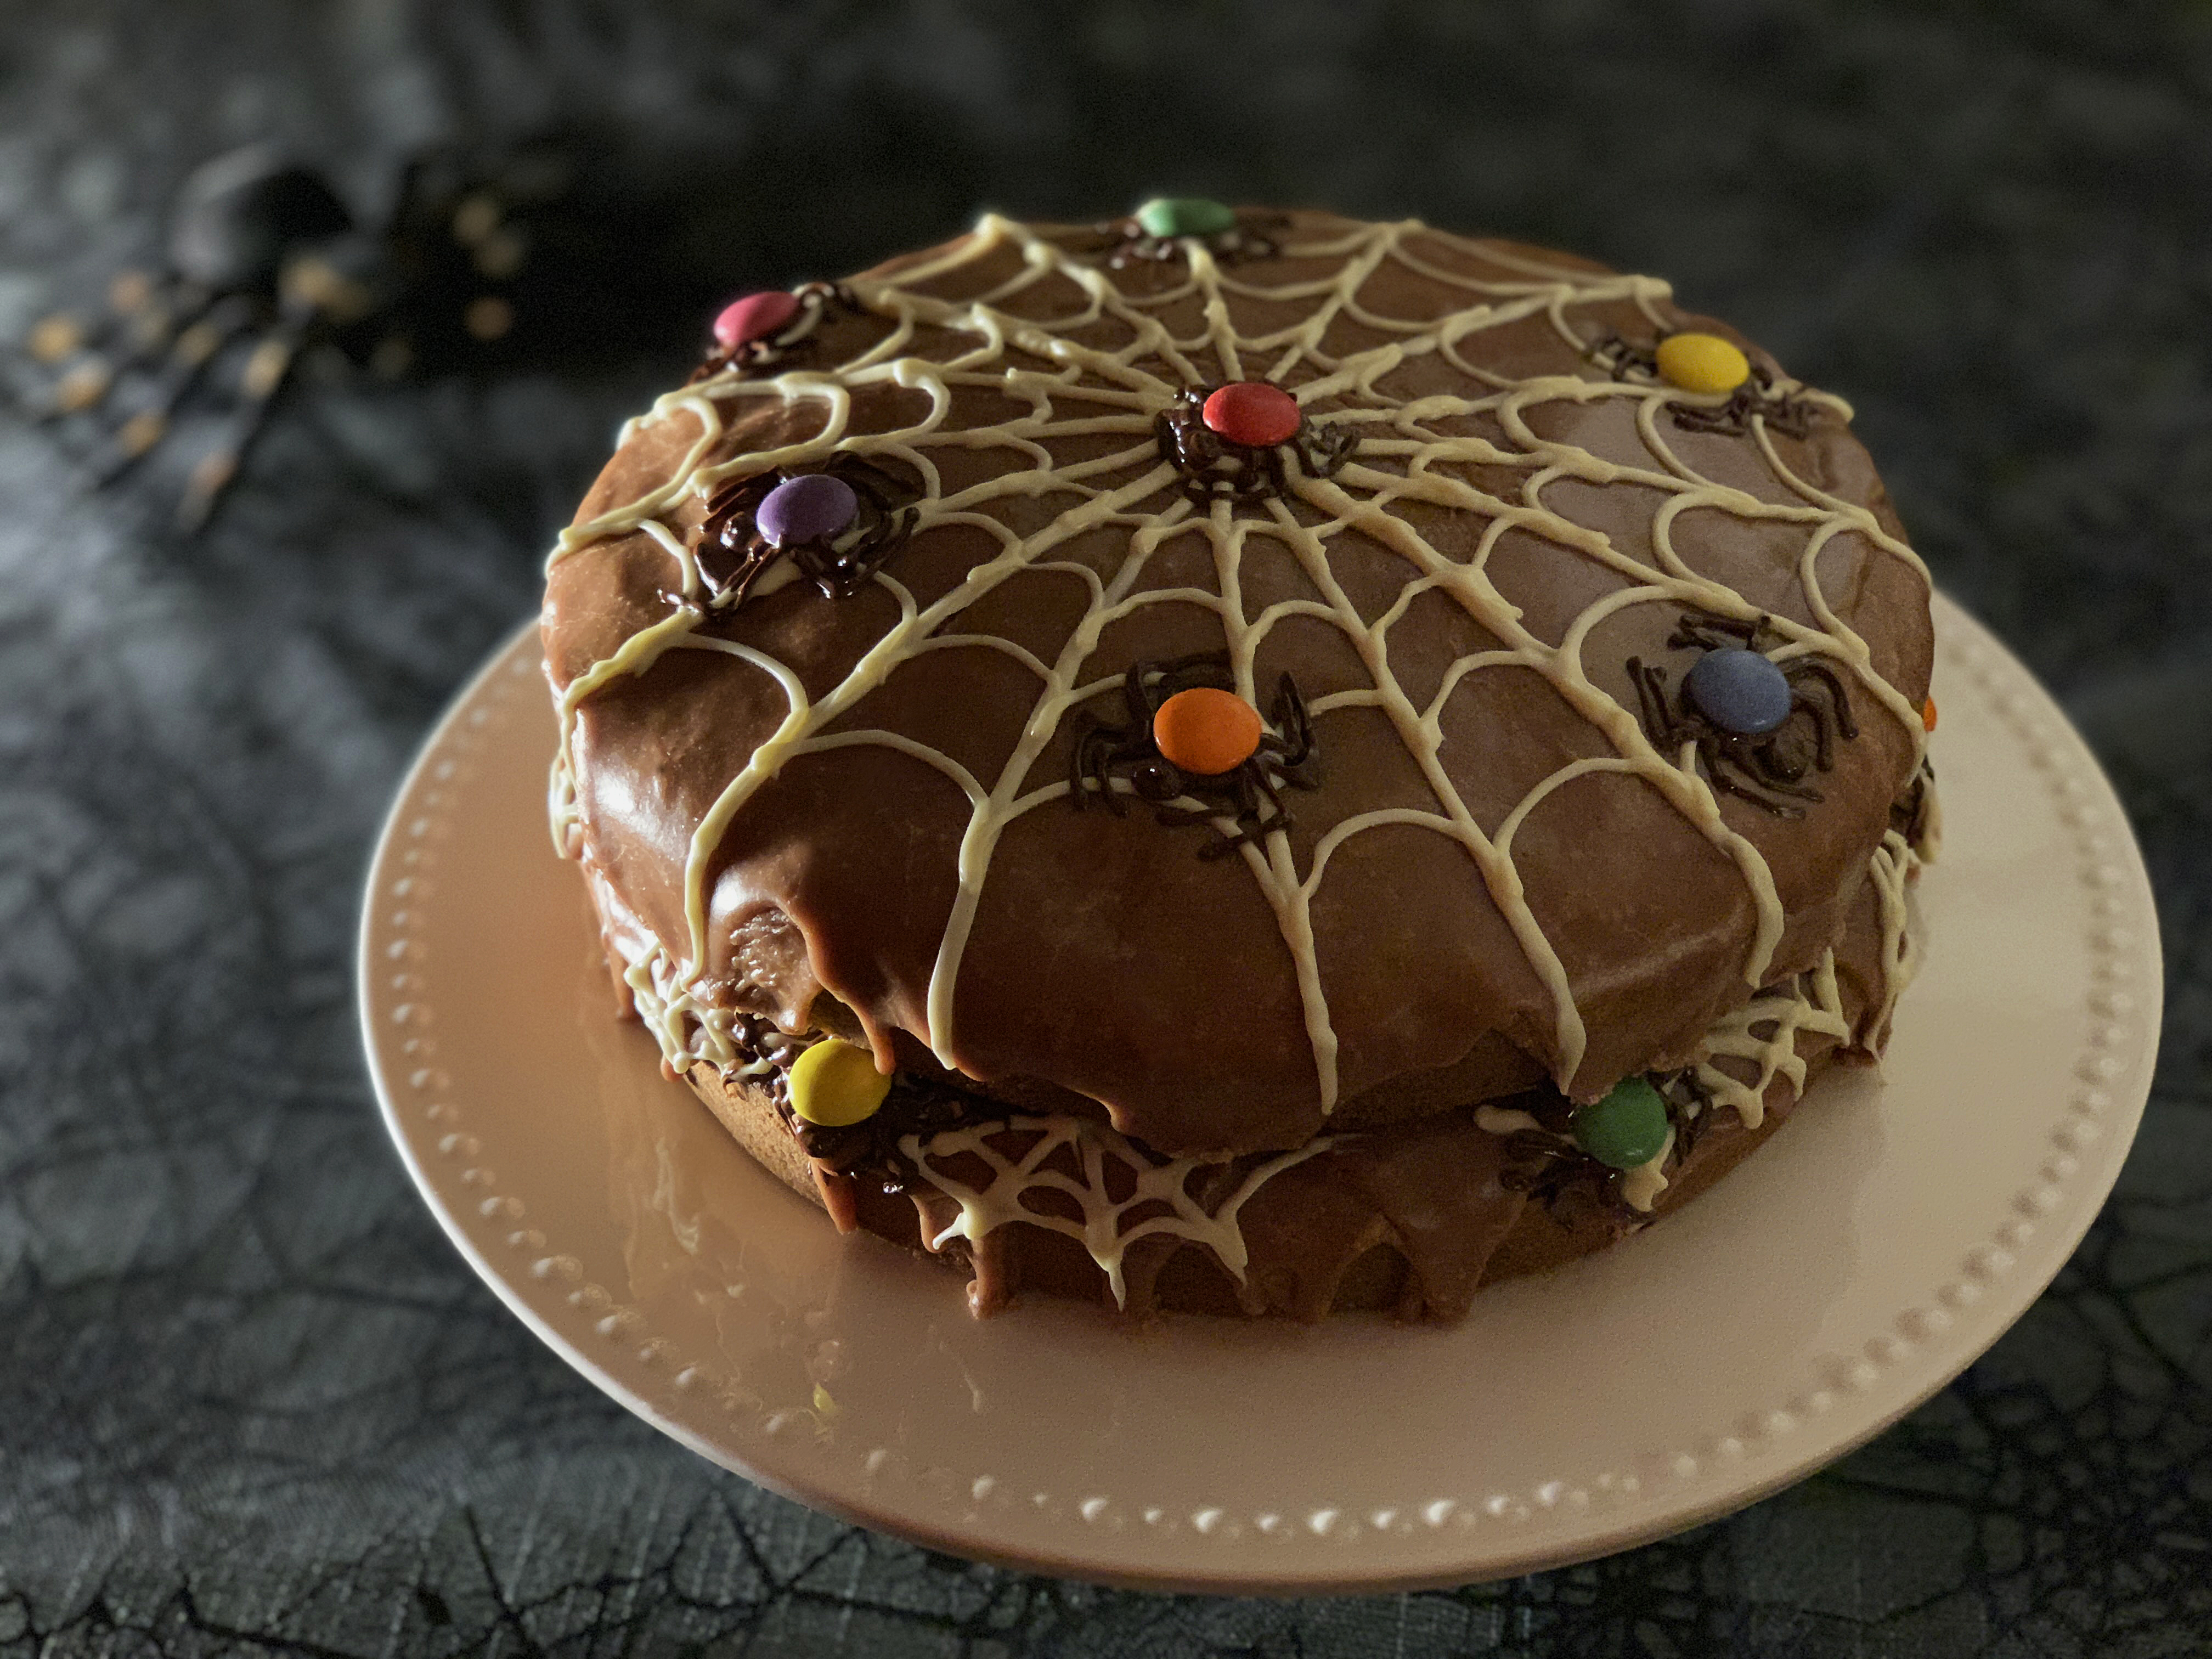 Itsy bitsy Spider Cake Recipe for Halloween